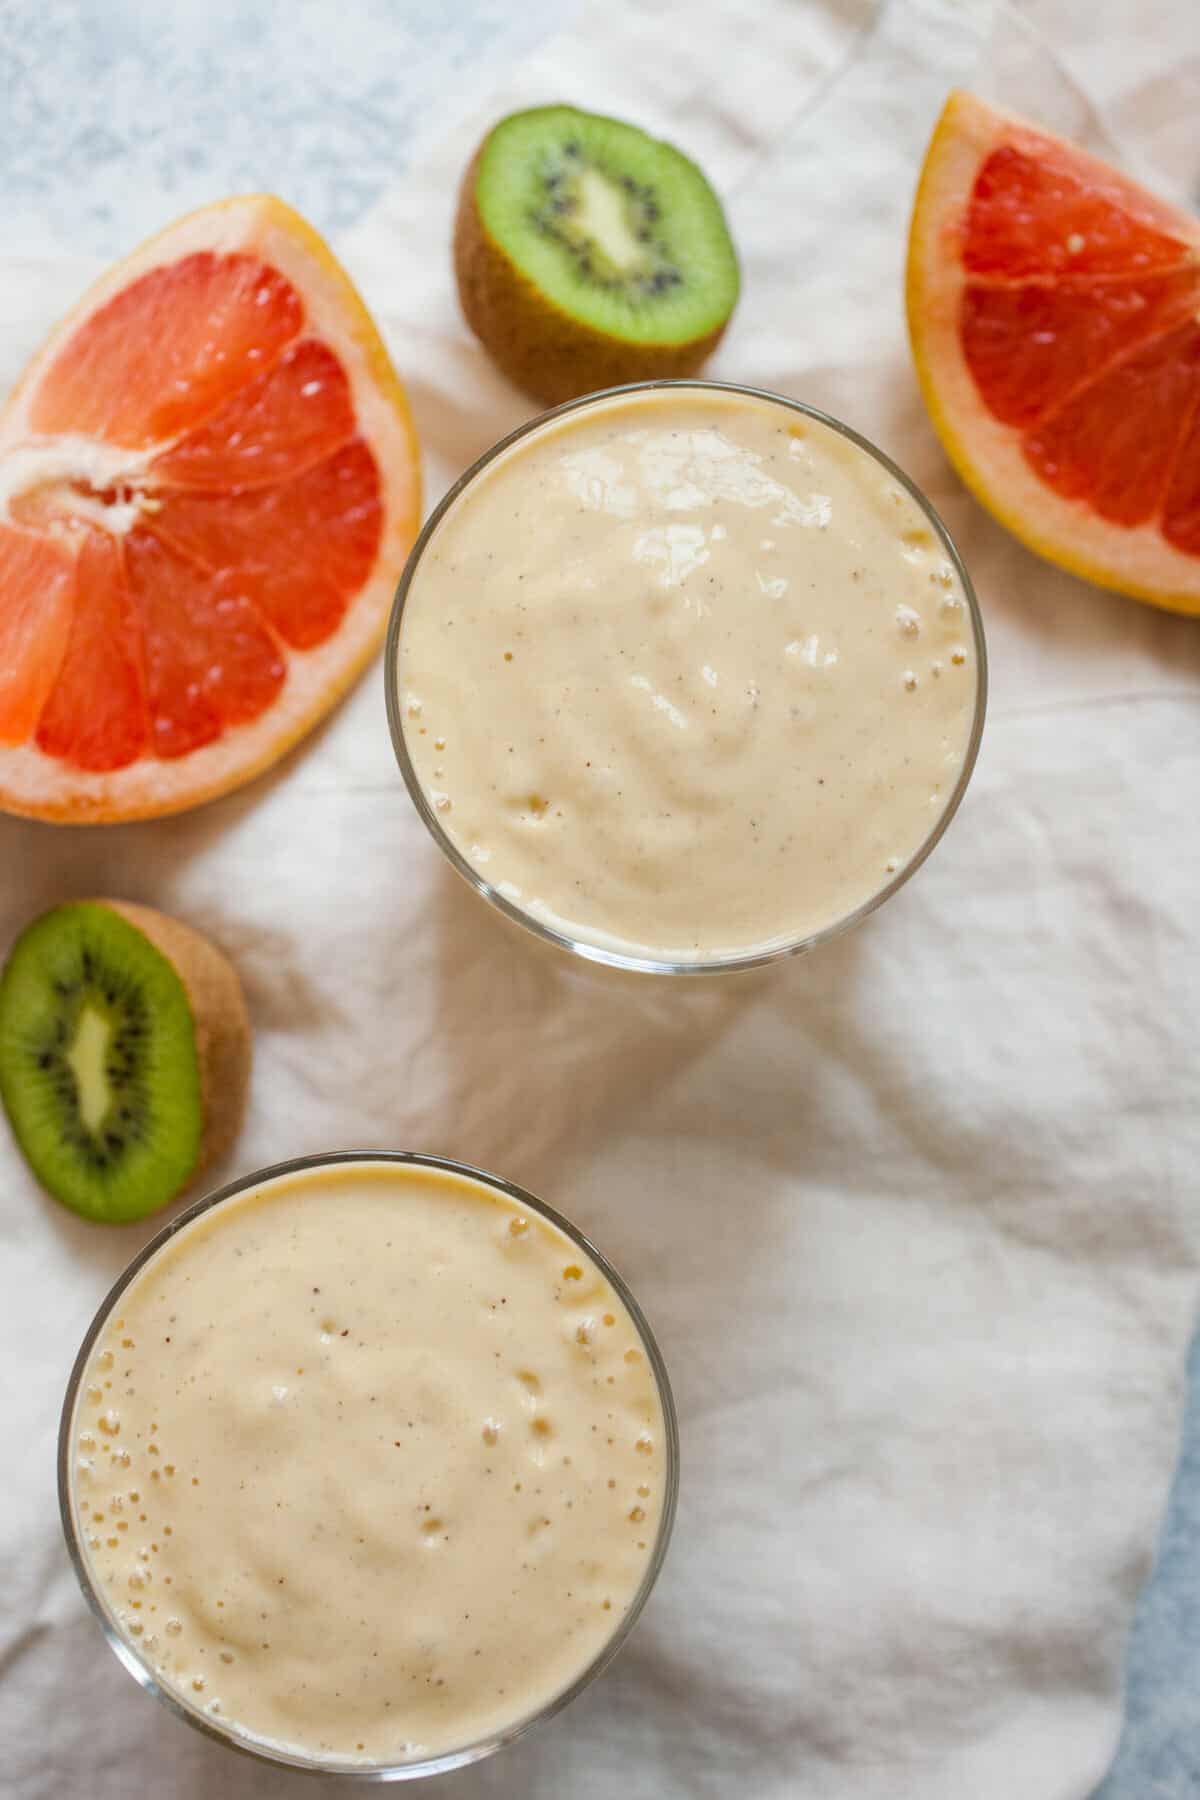 Creamy Citrus Smoothie: This simple smoothie uses fresh kiwi and grapefruit for a nice citrus flavor. It's filling and a perfect way to start the day! | macheesmo.com